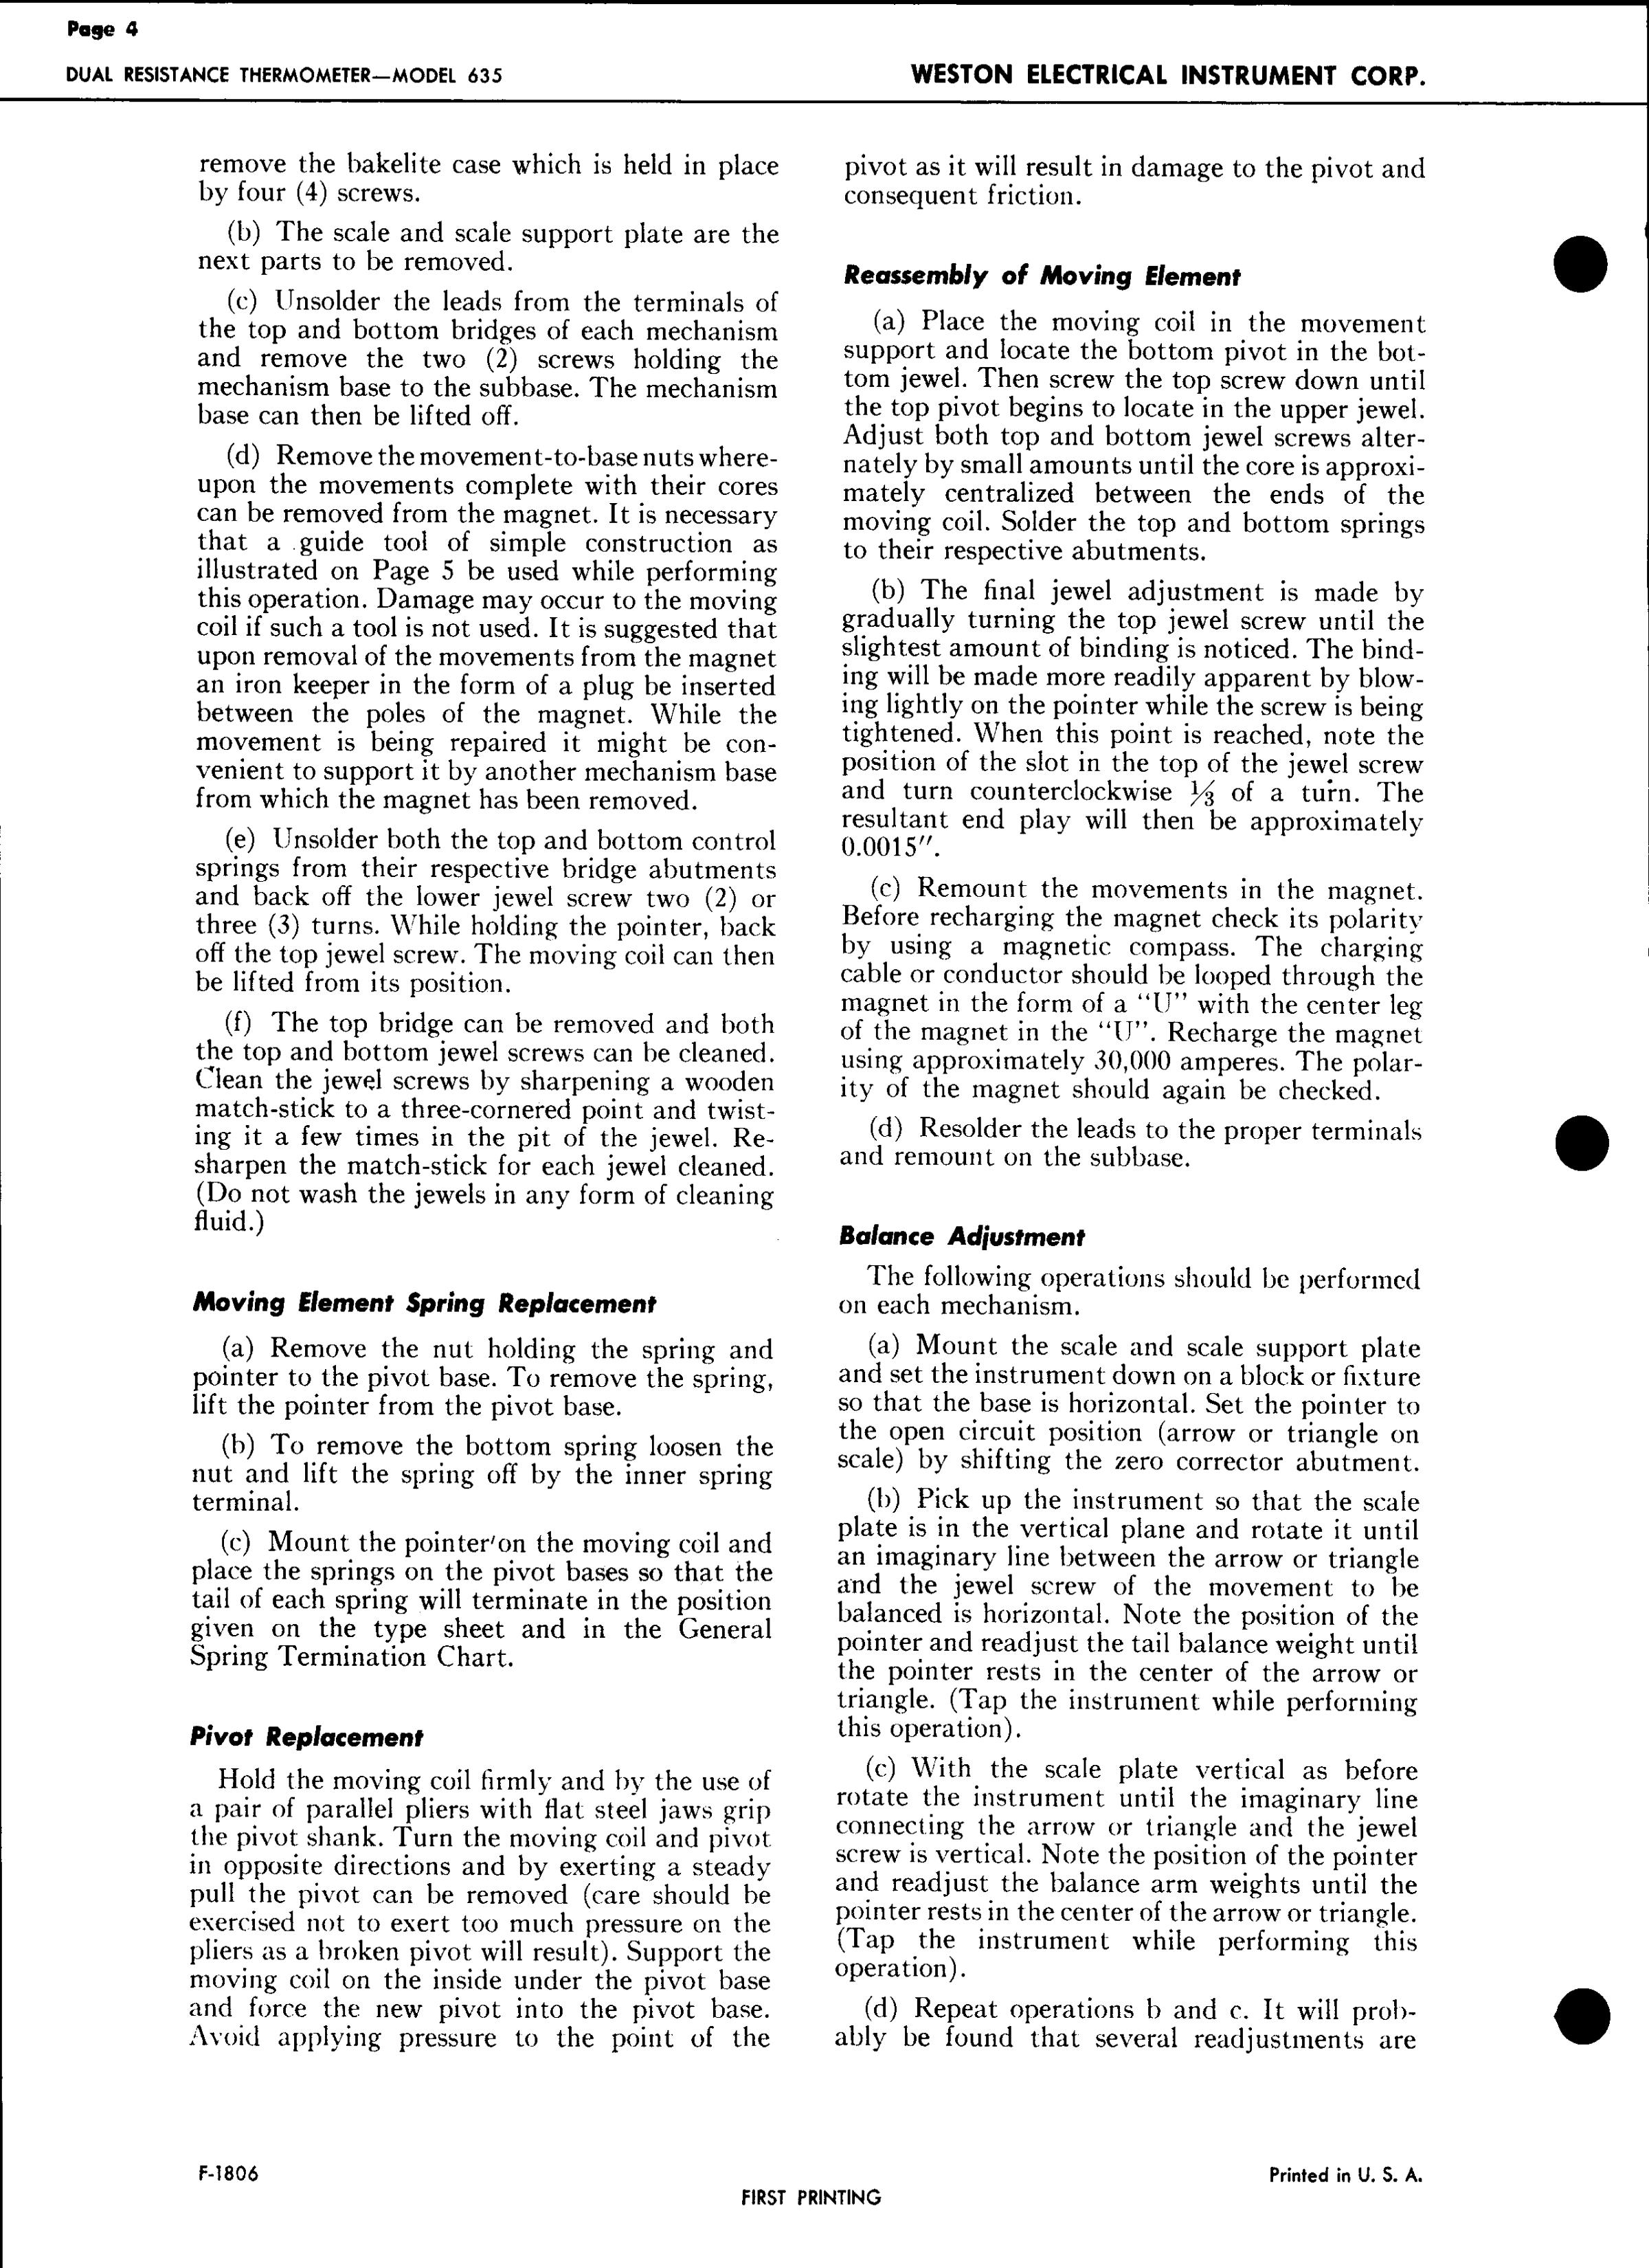 Sample page 4 from AirCorps Library document: Service Instructions for Model 35 Dual Resistance Thermometer